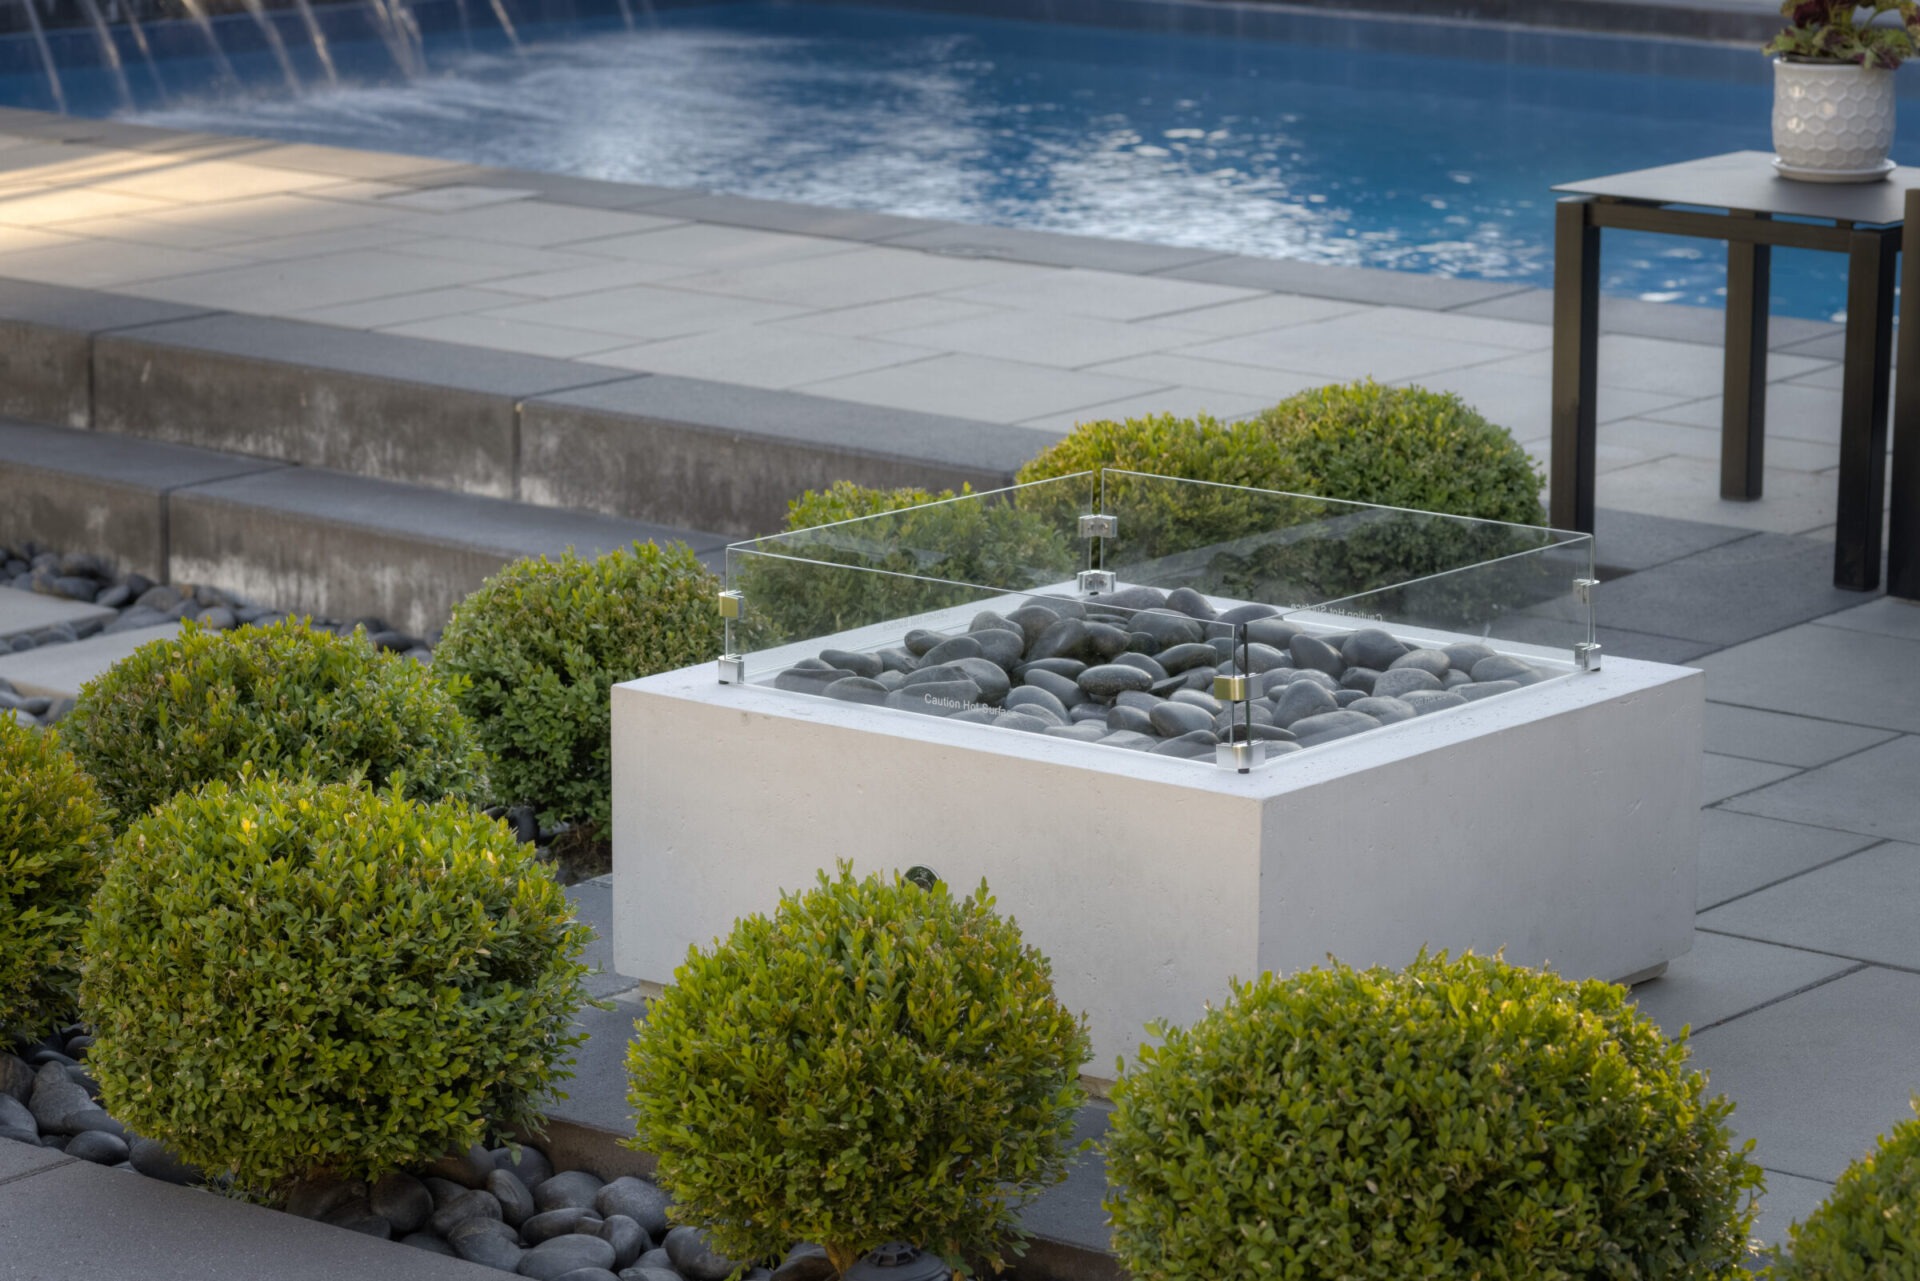 This image features a modern outdoor setting with a fire pit, rounded stones, boxwood shrubs, a swimming pool with fountains, and a side table.